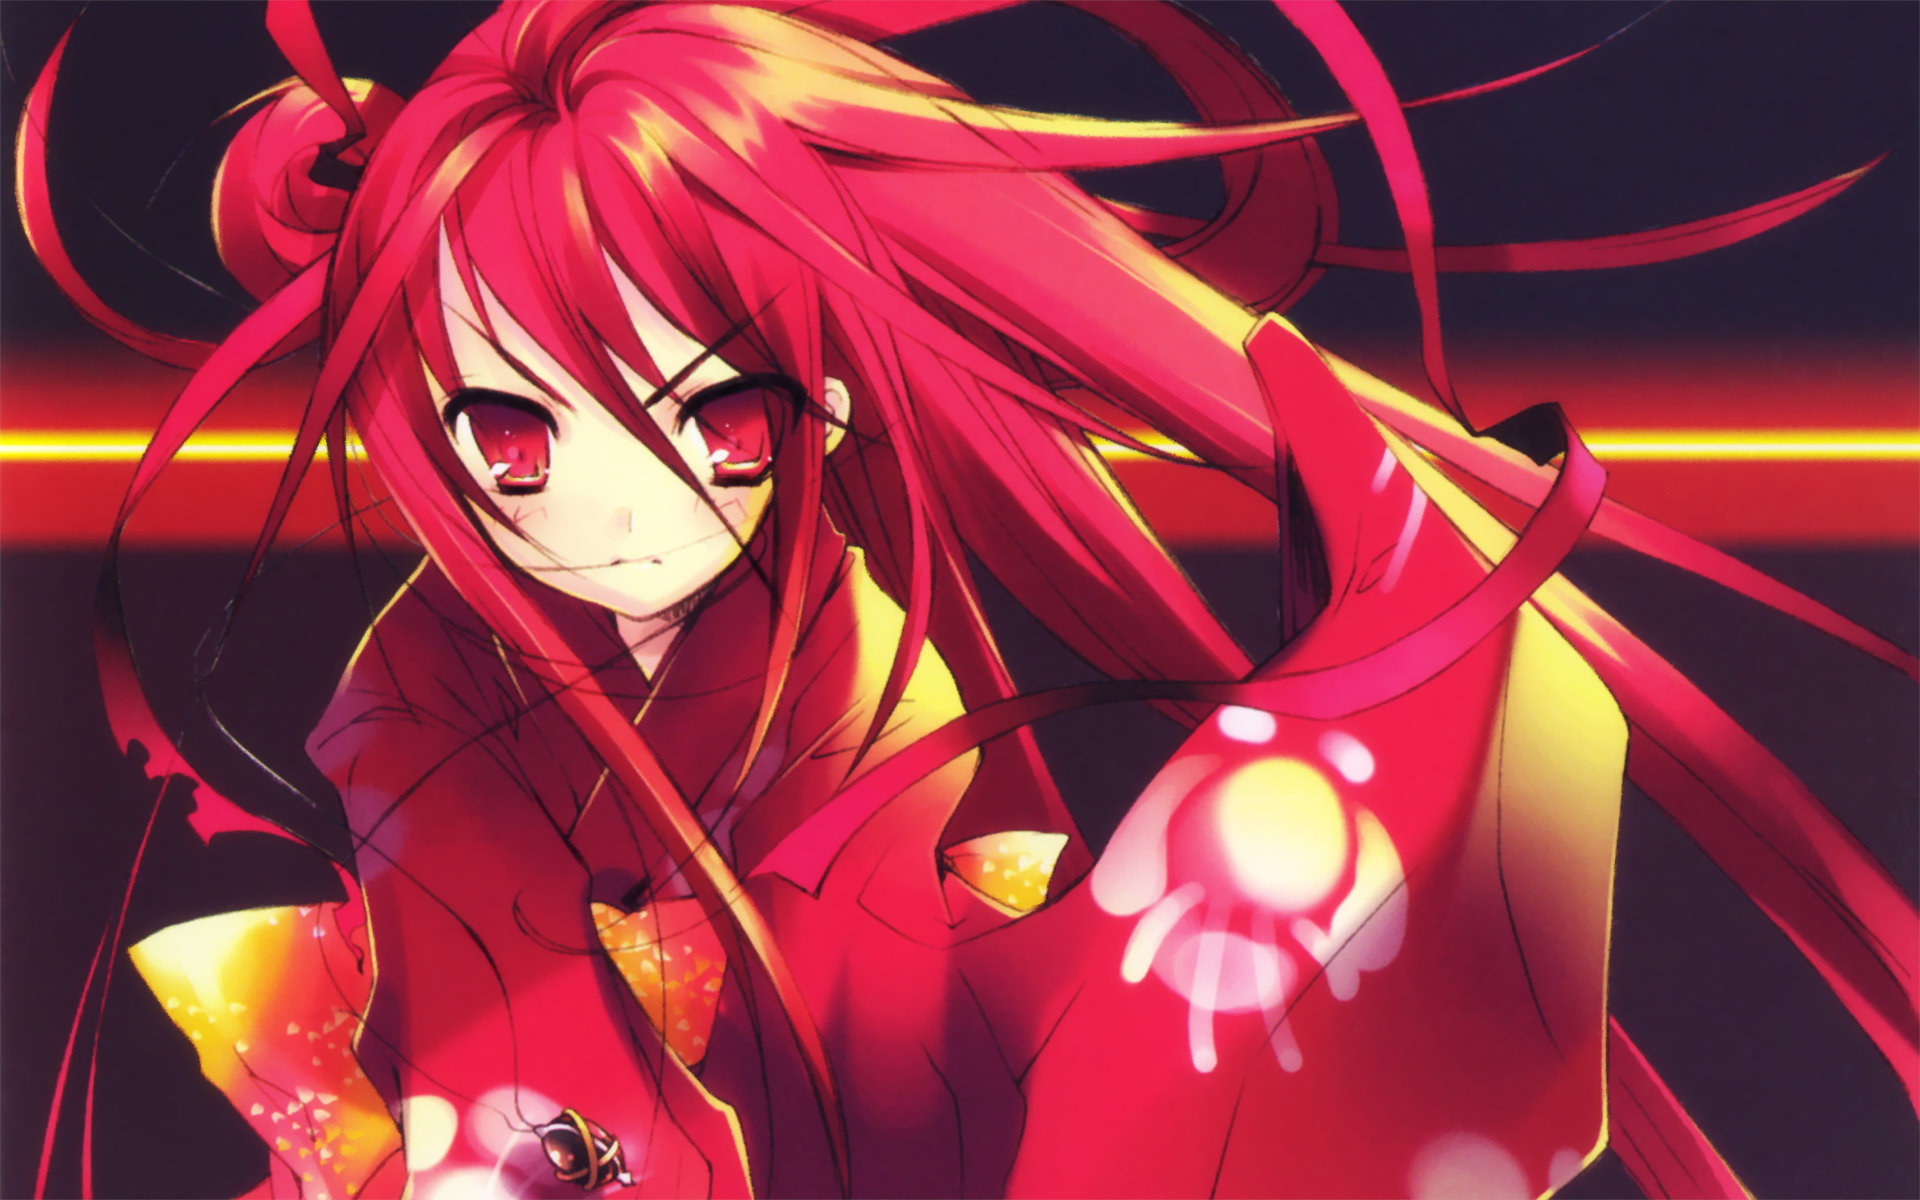 Shana (Shakugan no Shana) | Shakugan no shana, Anime images, Anime  characters